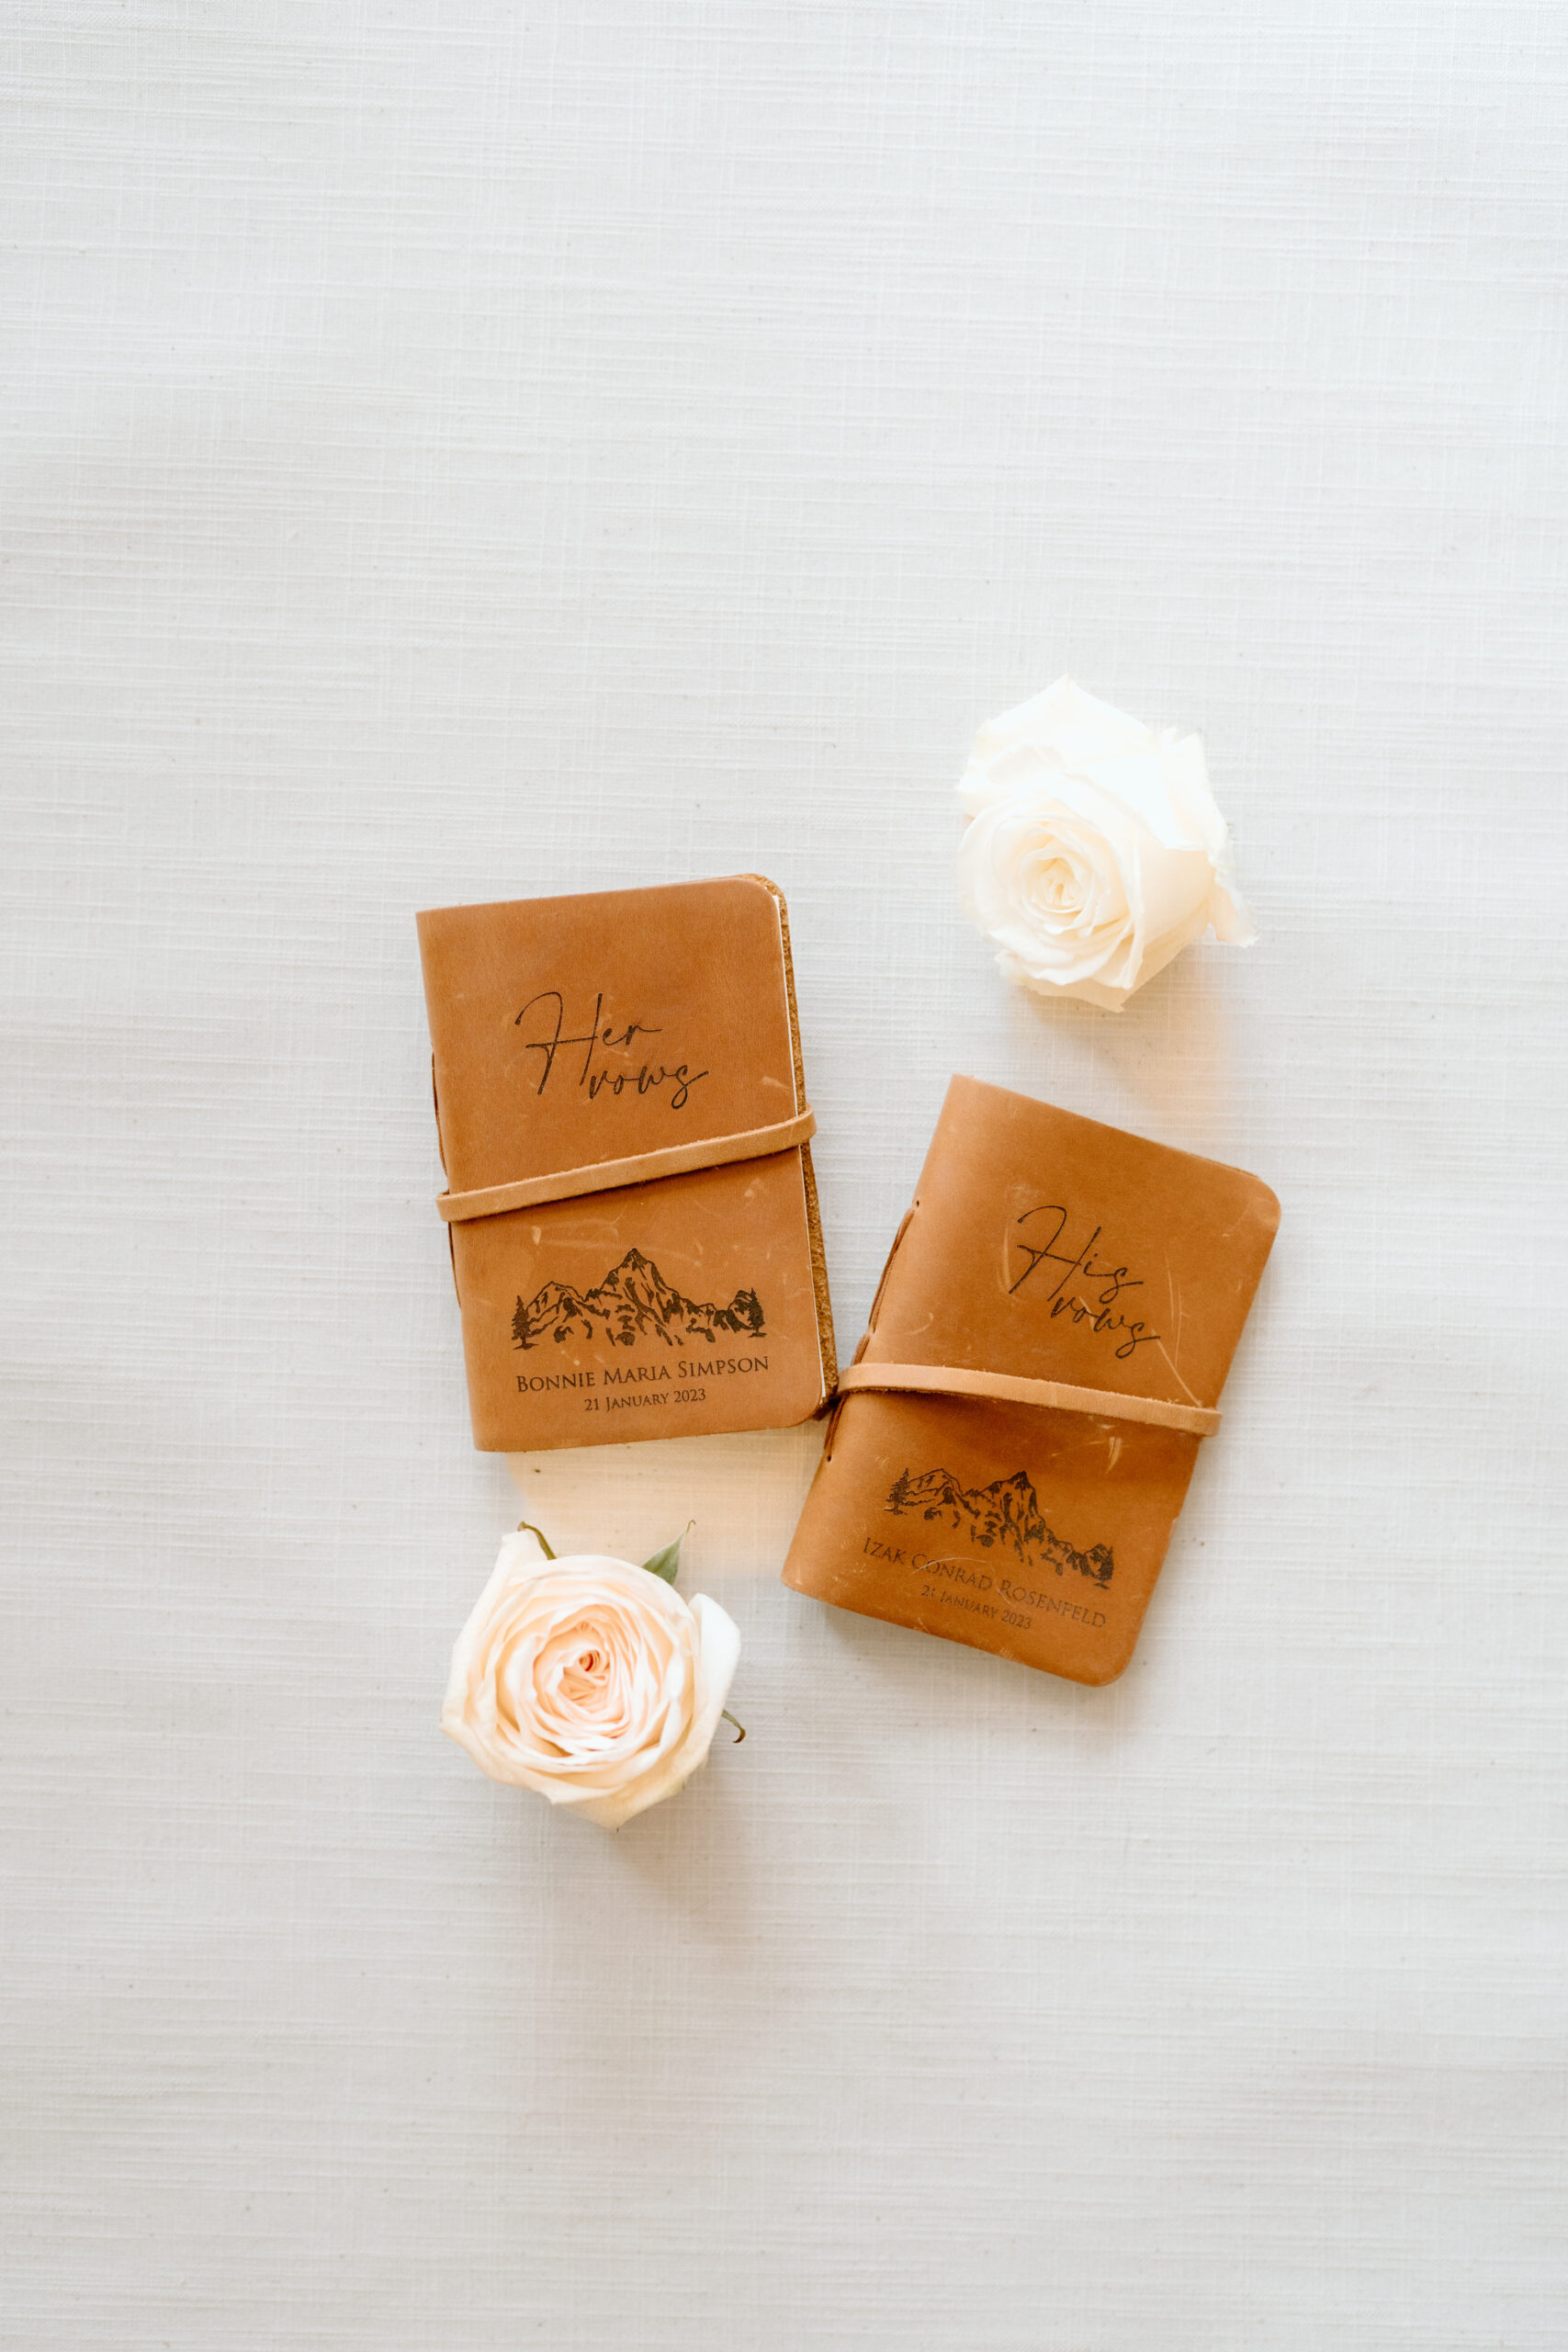 His and Hers leather wedding vow books